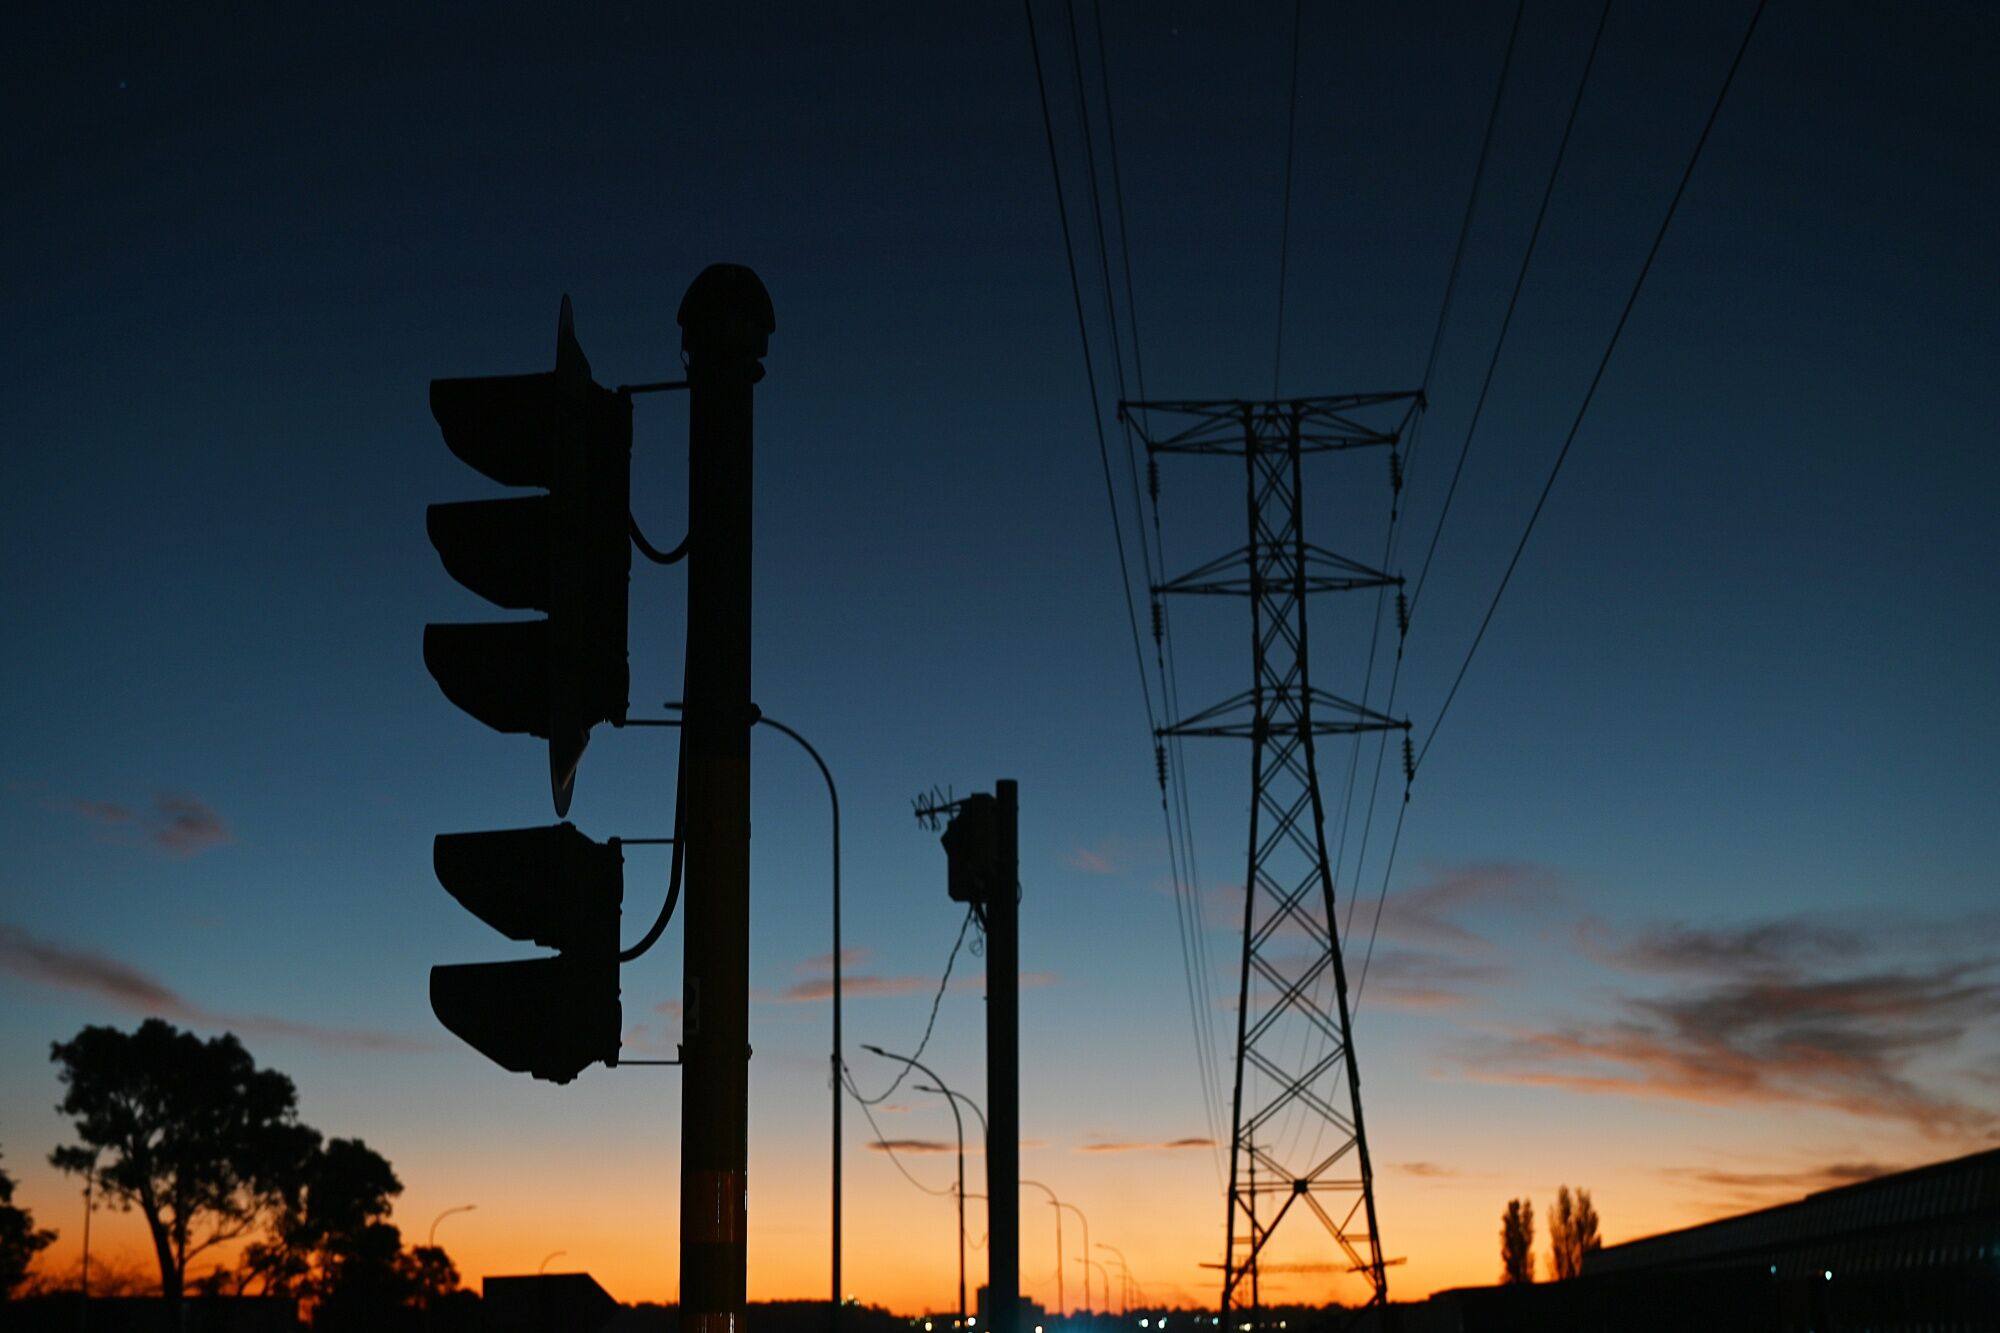 South Africa is struggling with the impact of power cuts. Photo: Bloomberg